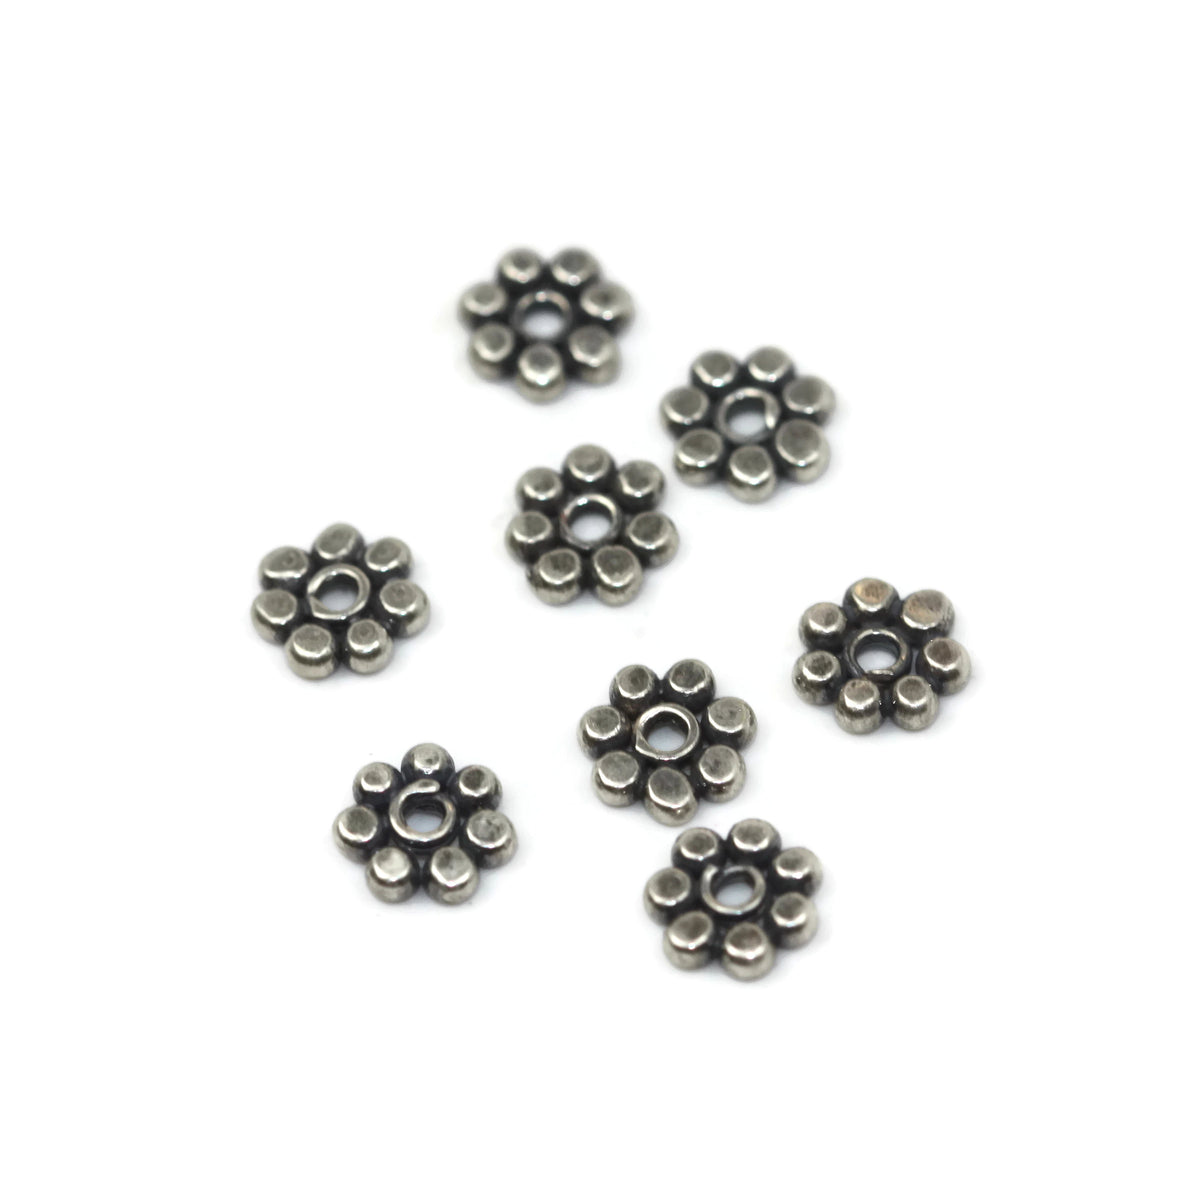 Bali Sterling Silver Spacer Beads | 5 x 3.5mm | 1 piece